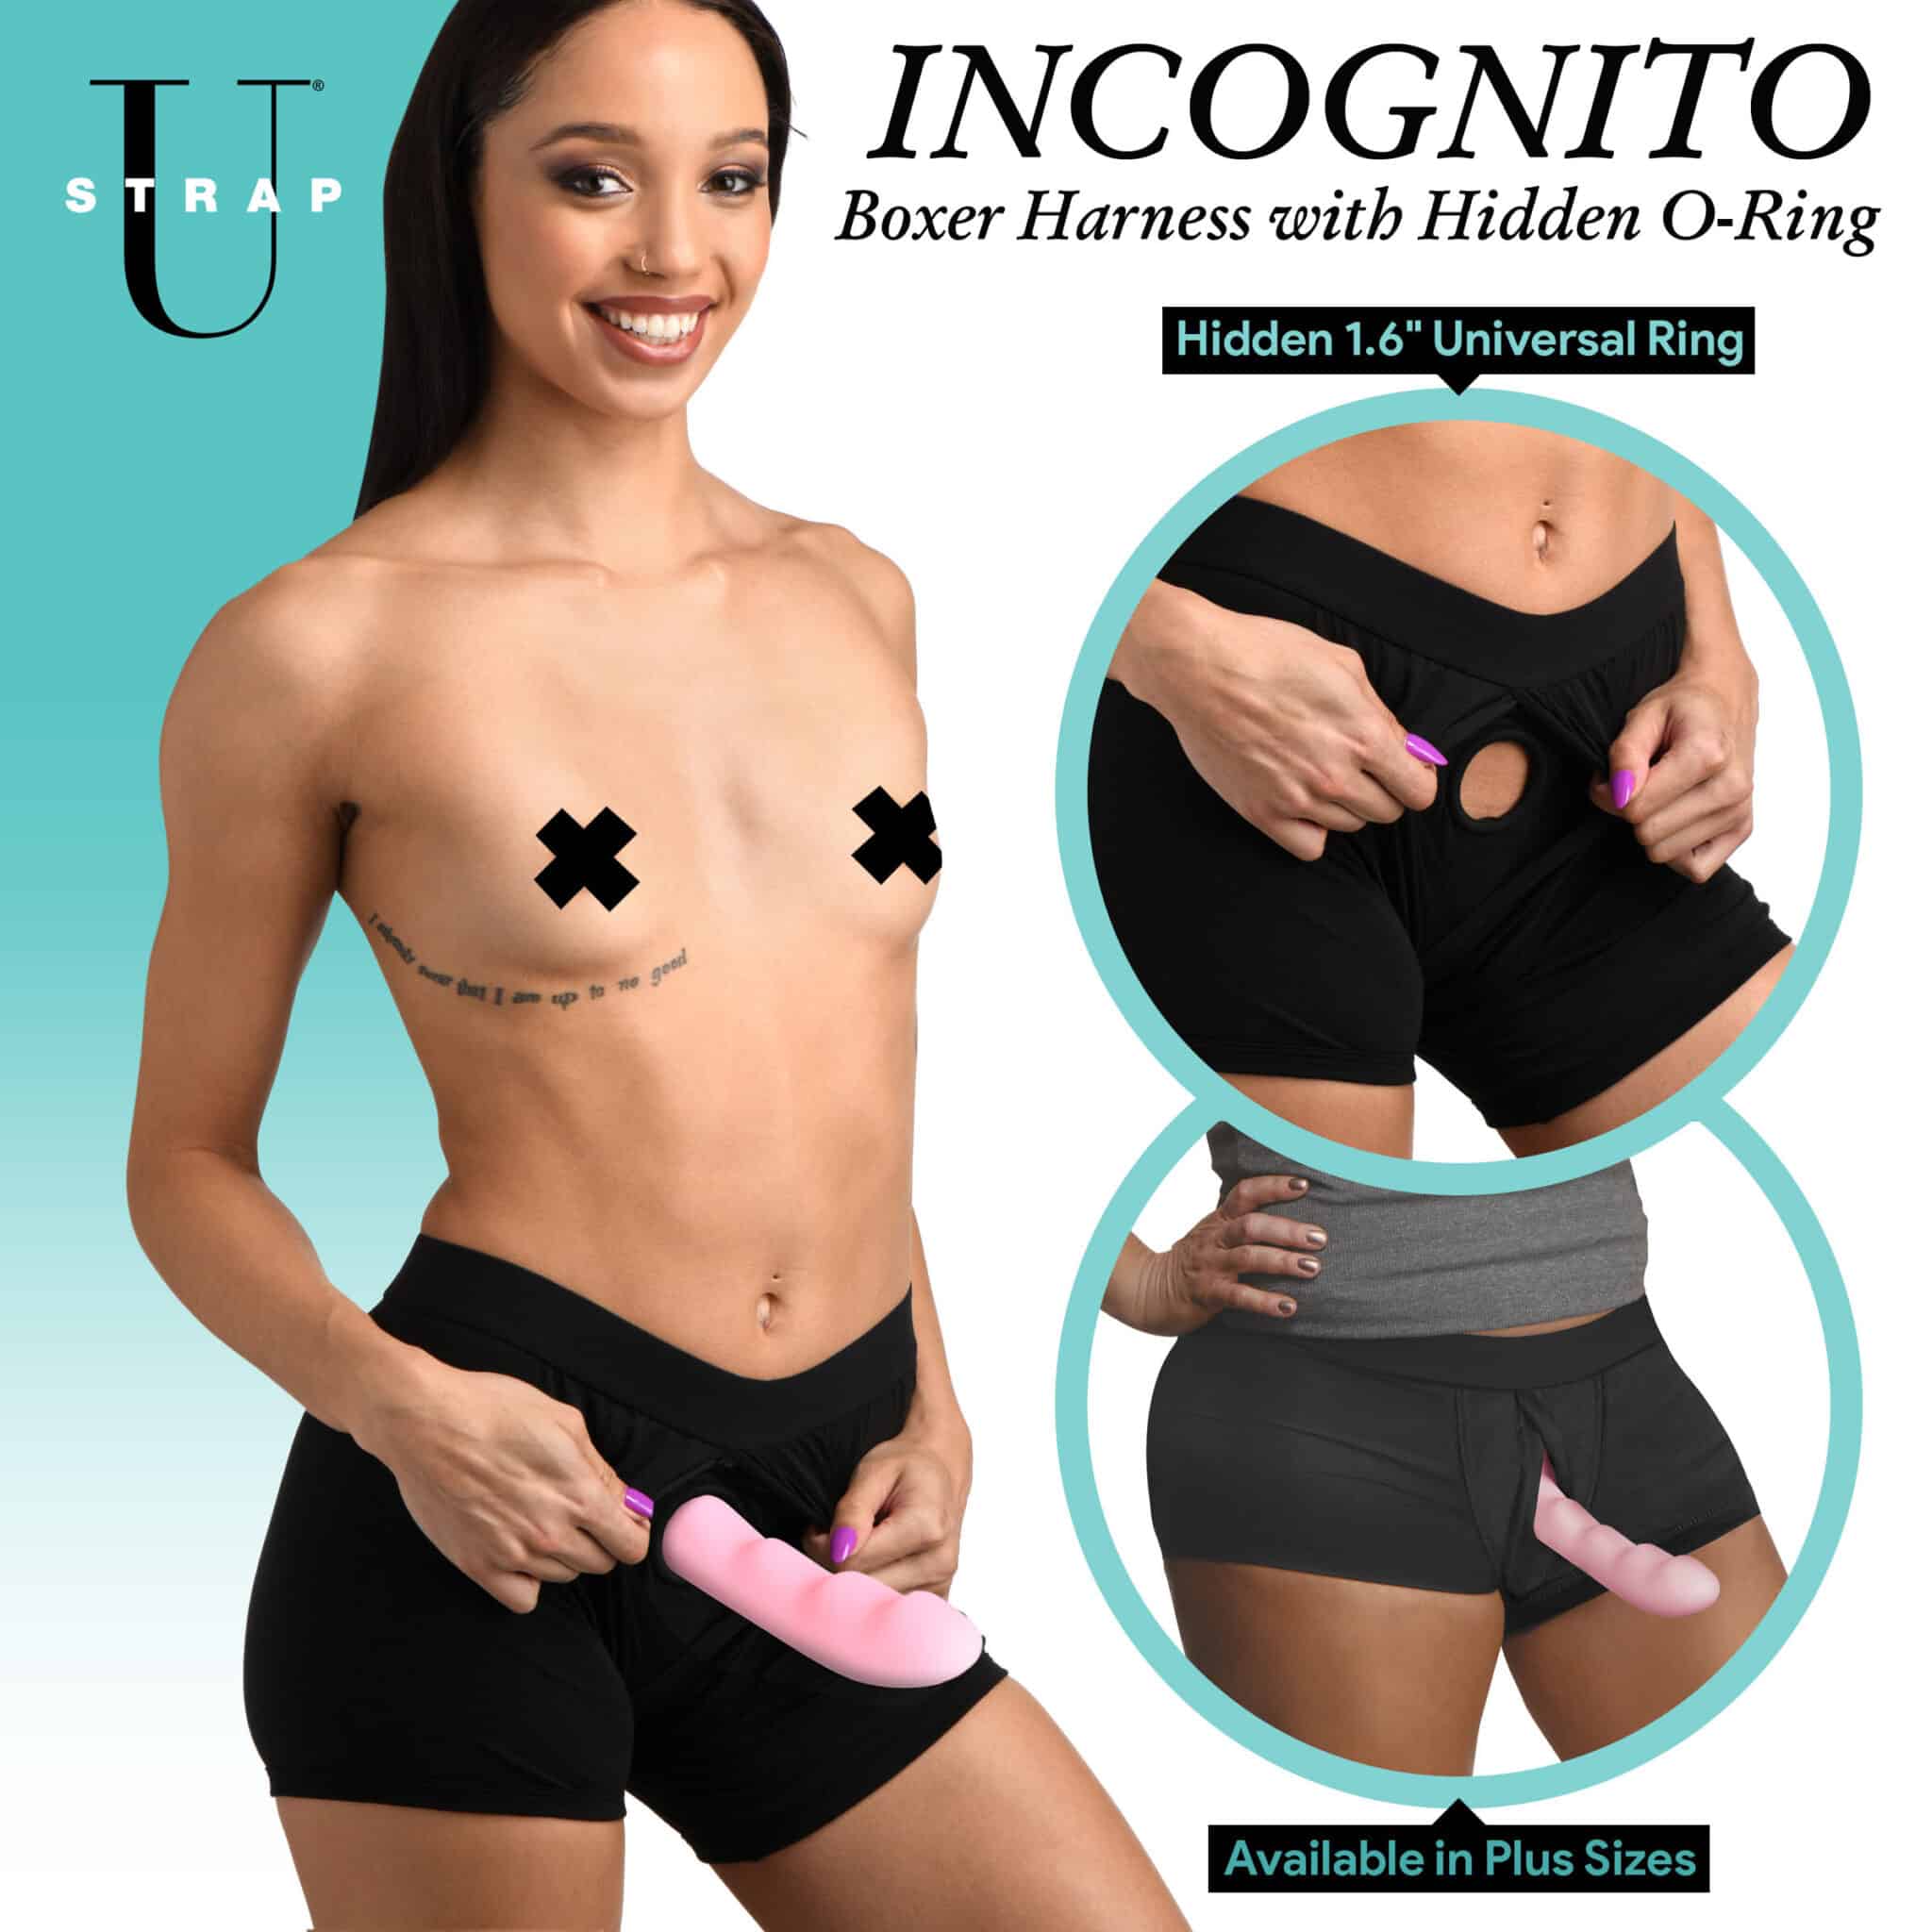 Incognito Boxer Harness with Hidden O-Ring – 3XL